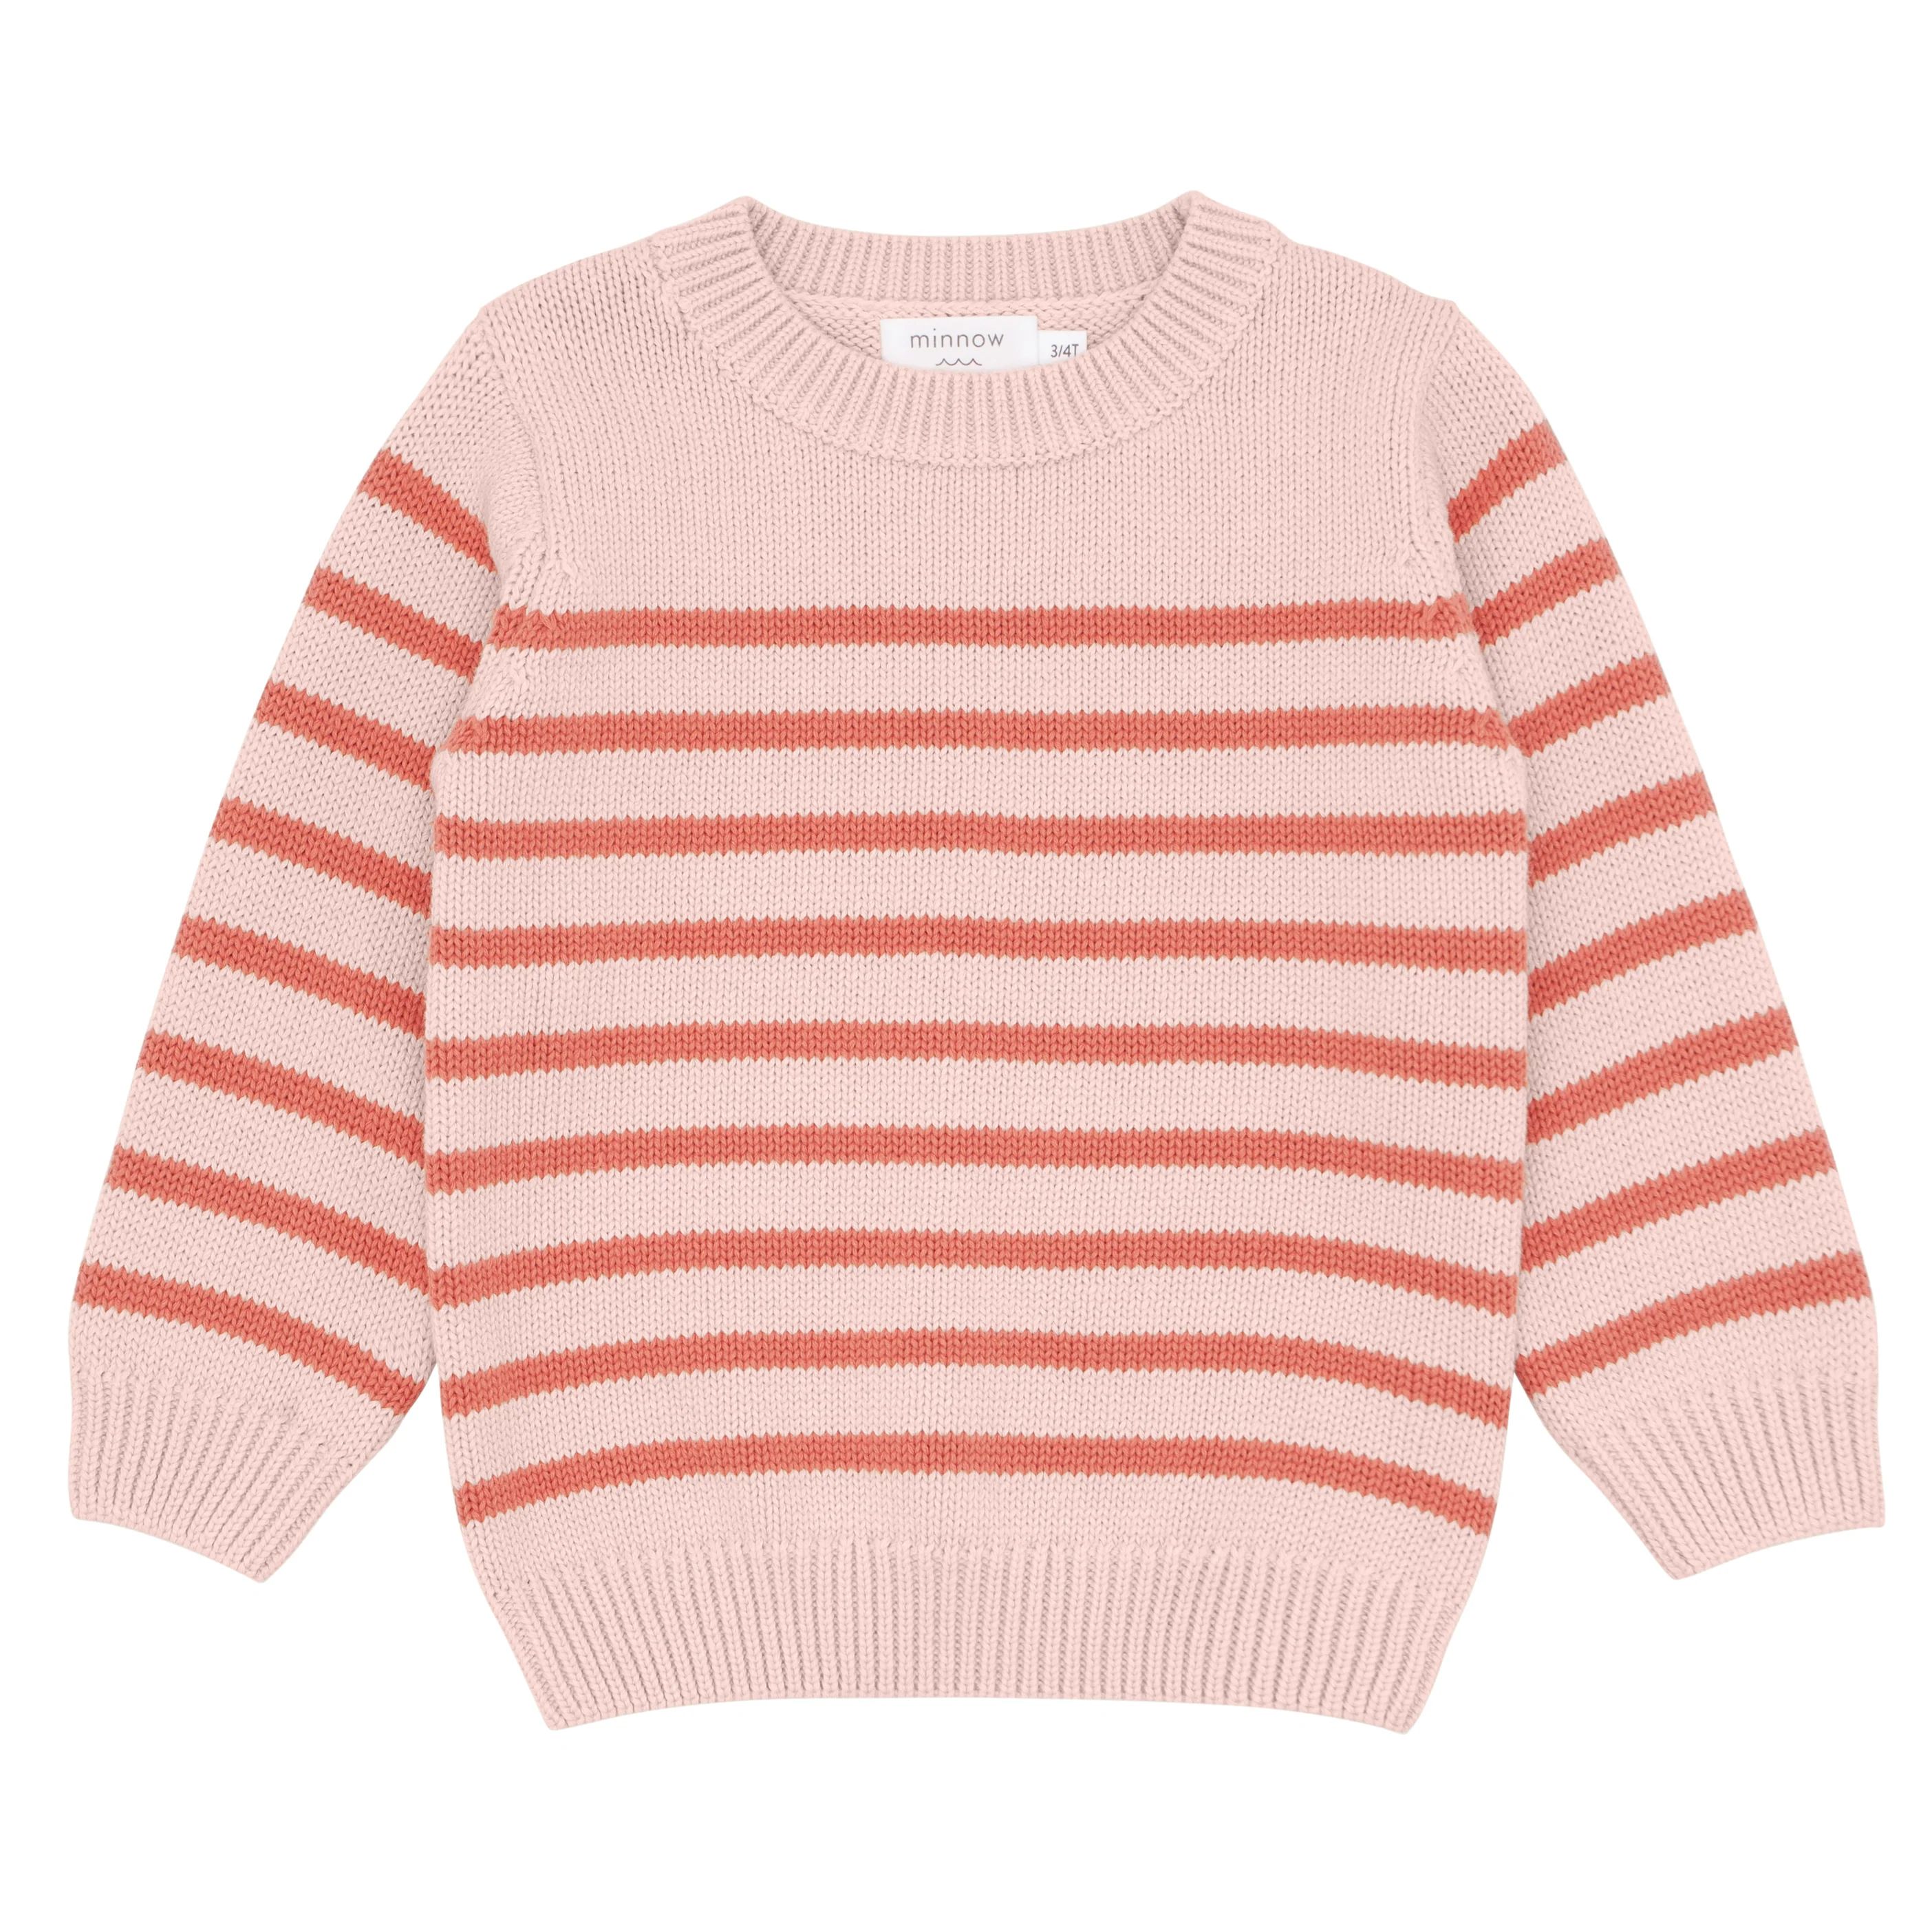 unisex pink and dusty red stripe knit sweater | minnow